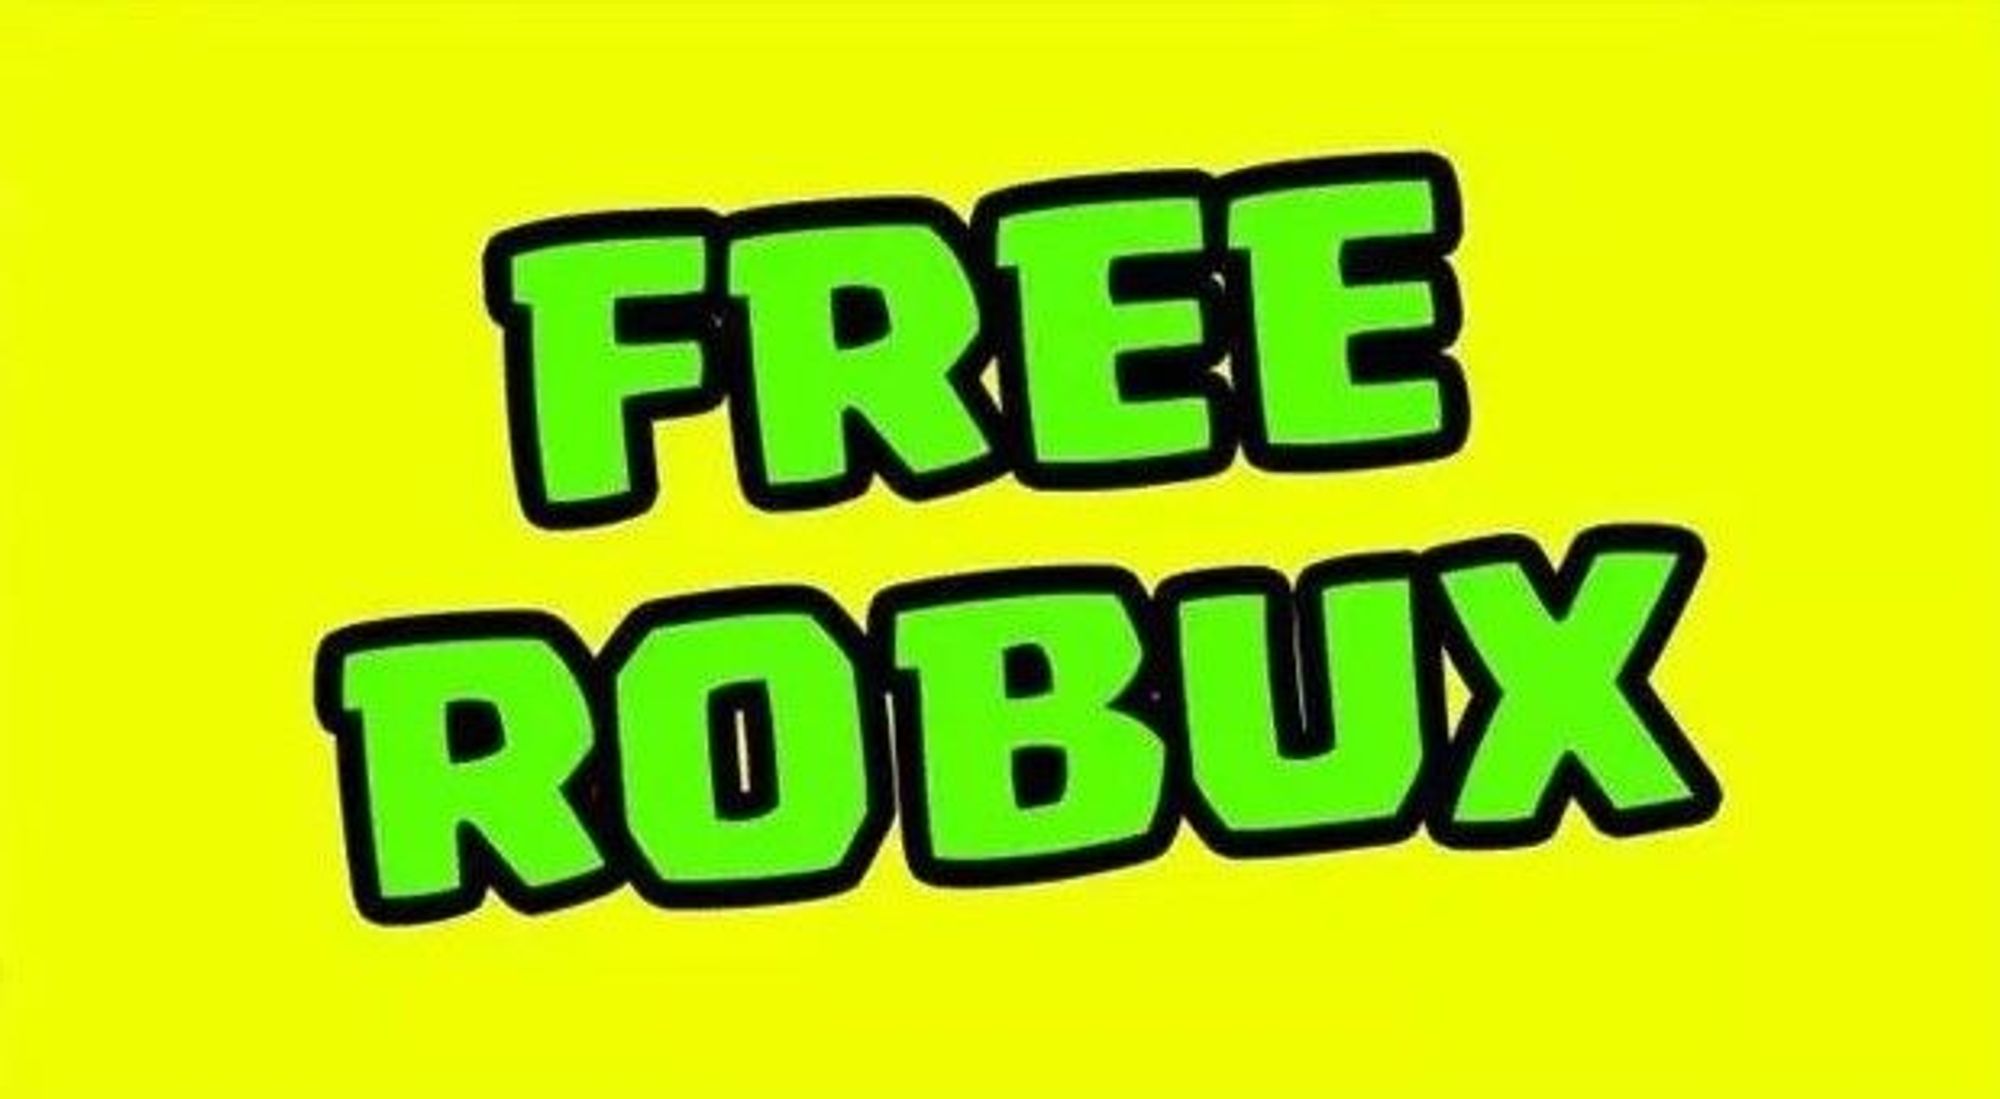 How To Get Free Robux - get free robux online